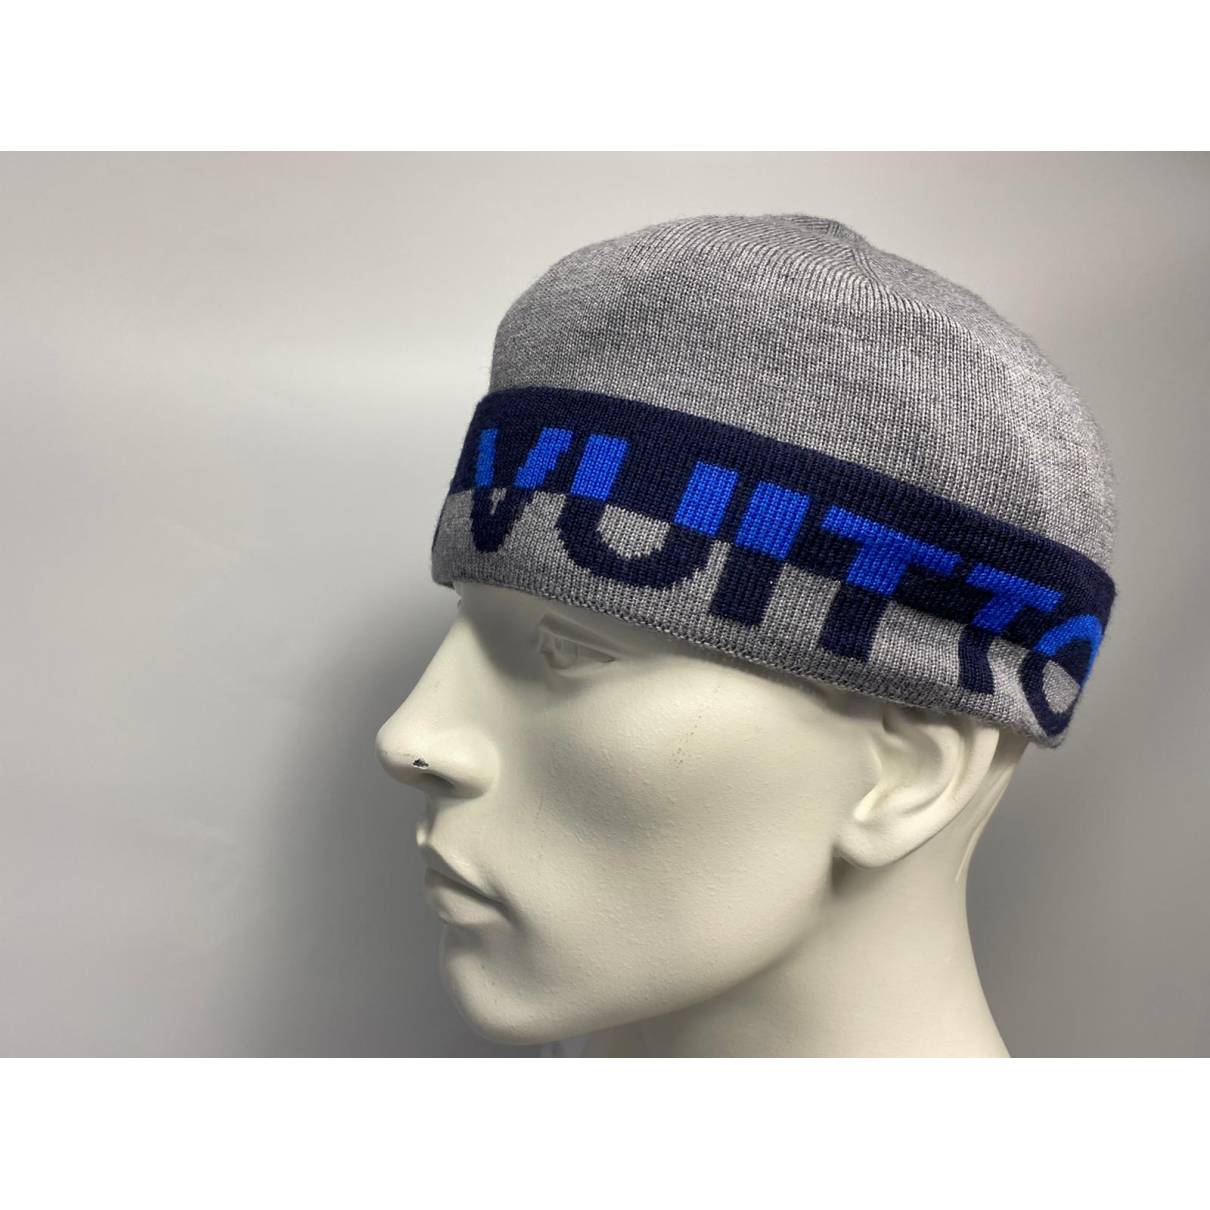 Louis Vuitton - Authenticated Hat - Wool Grey For Man, Never Worn